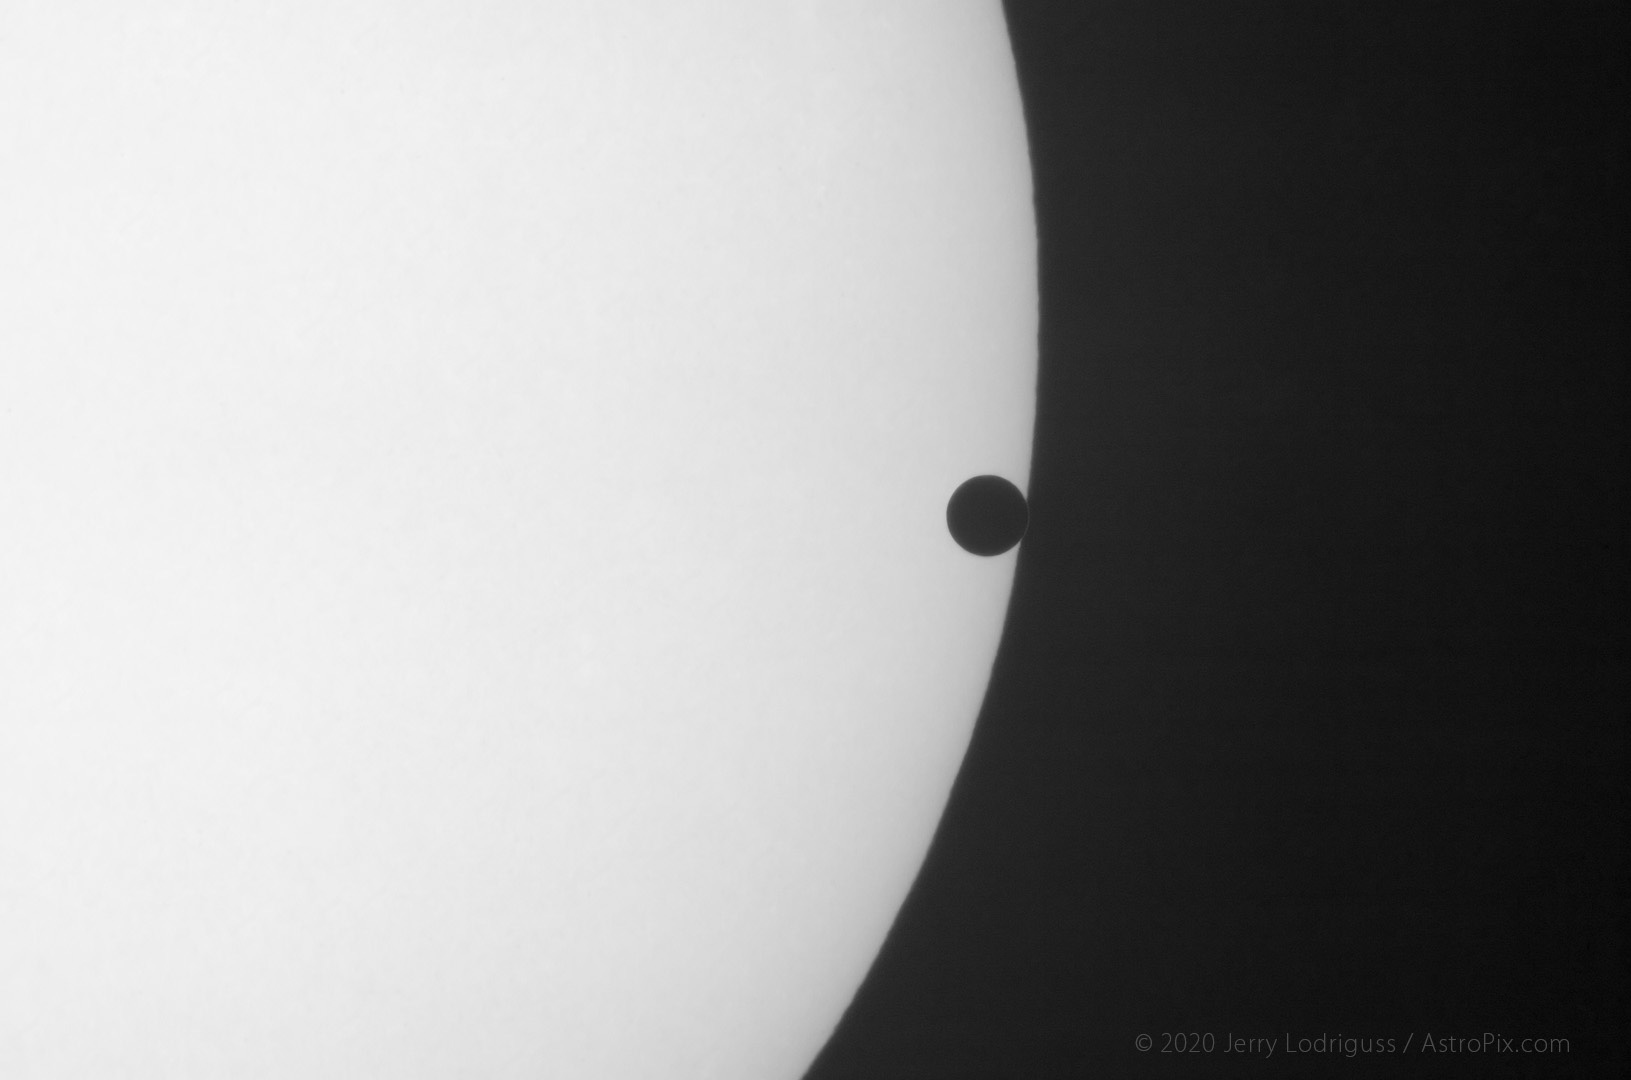 The atmosphere of Venus is visible as a short arc refracting sunlight and completing the circle of the silhouette of Venus as it egresses the Sun during the 2004 transit of Venus.